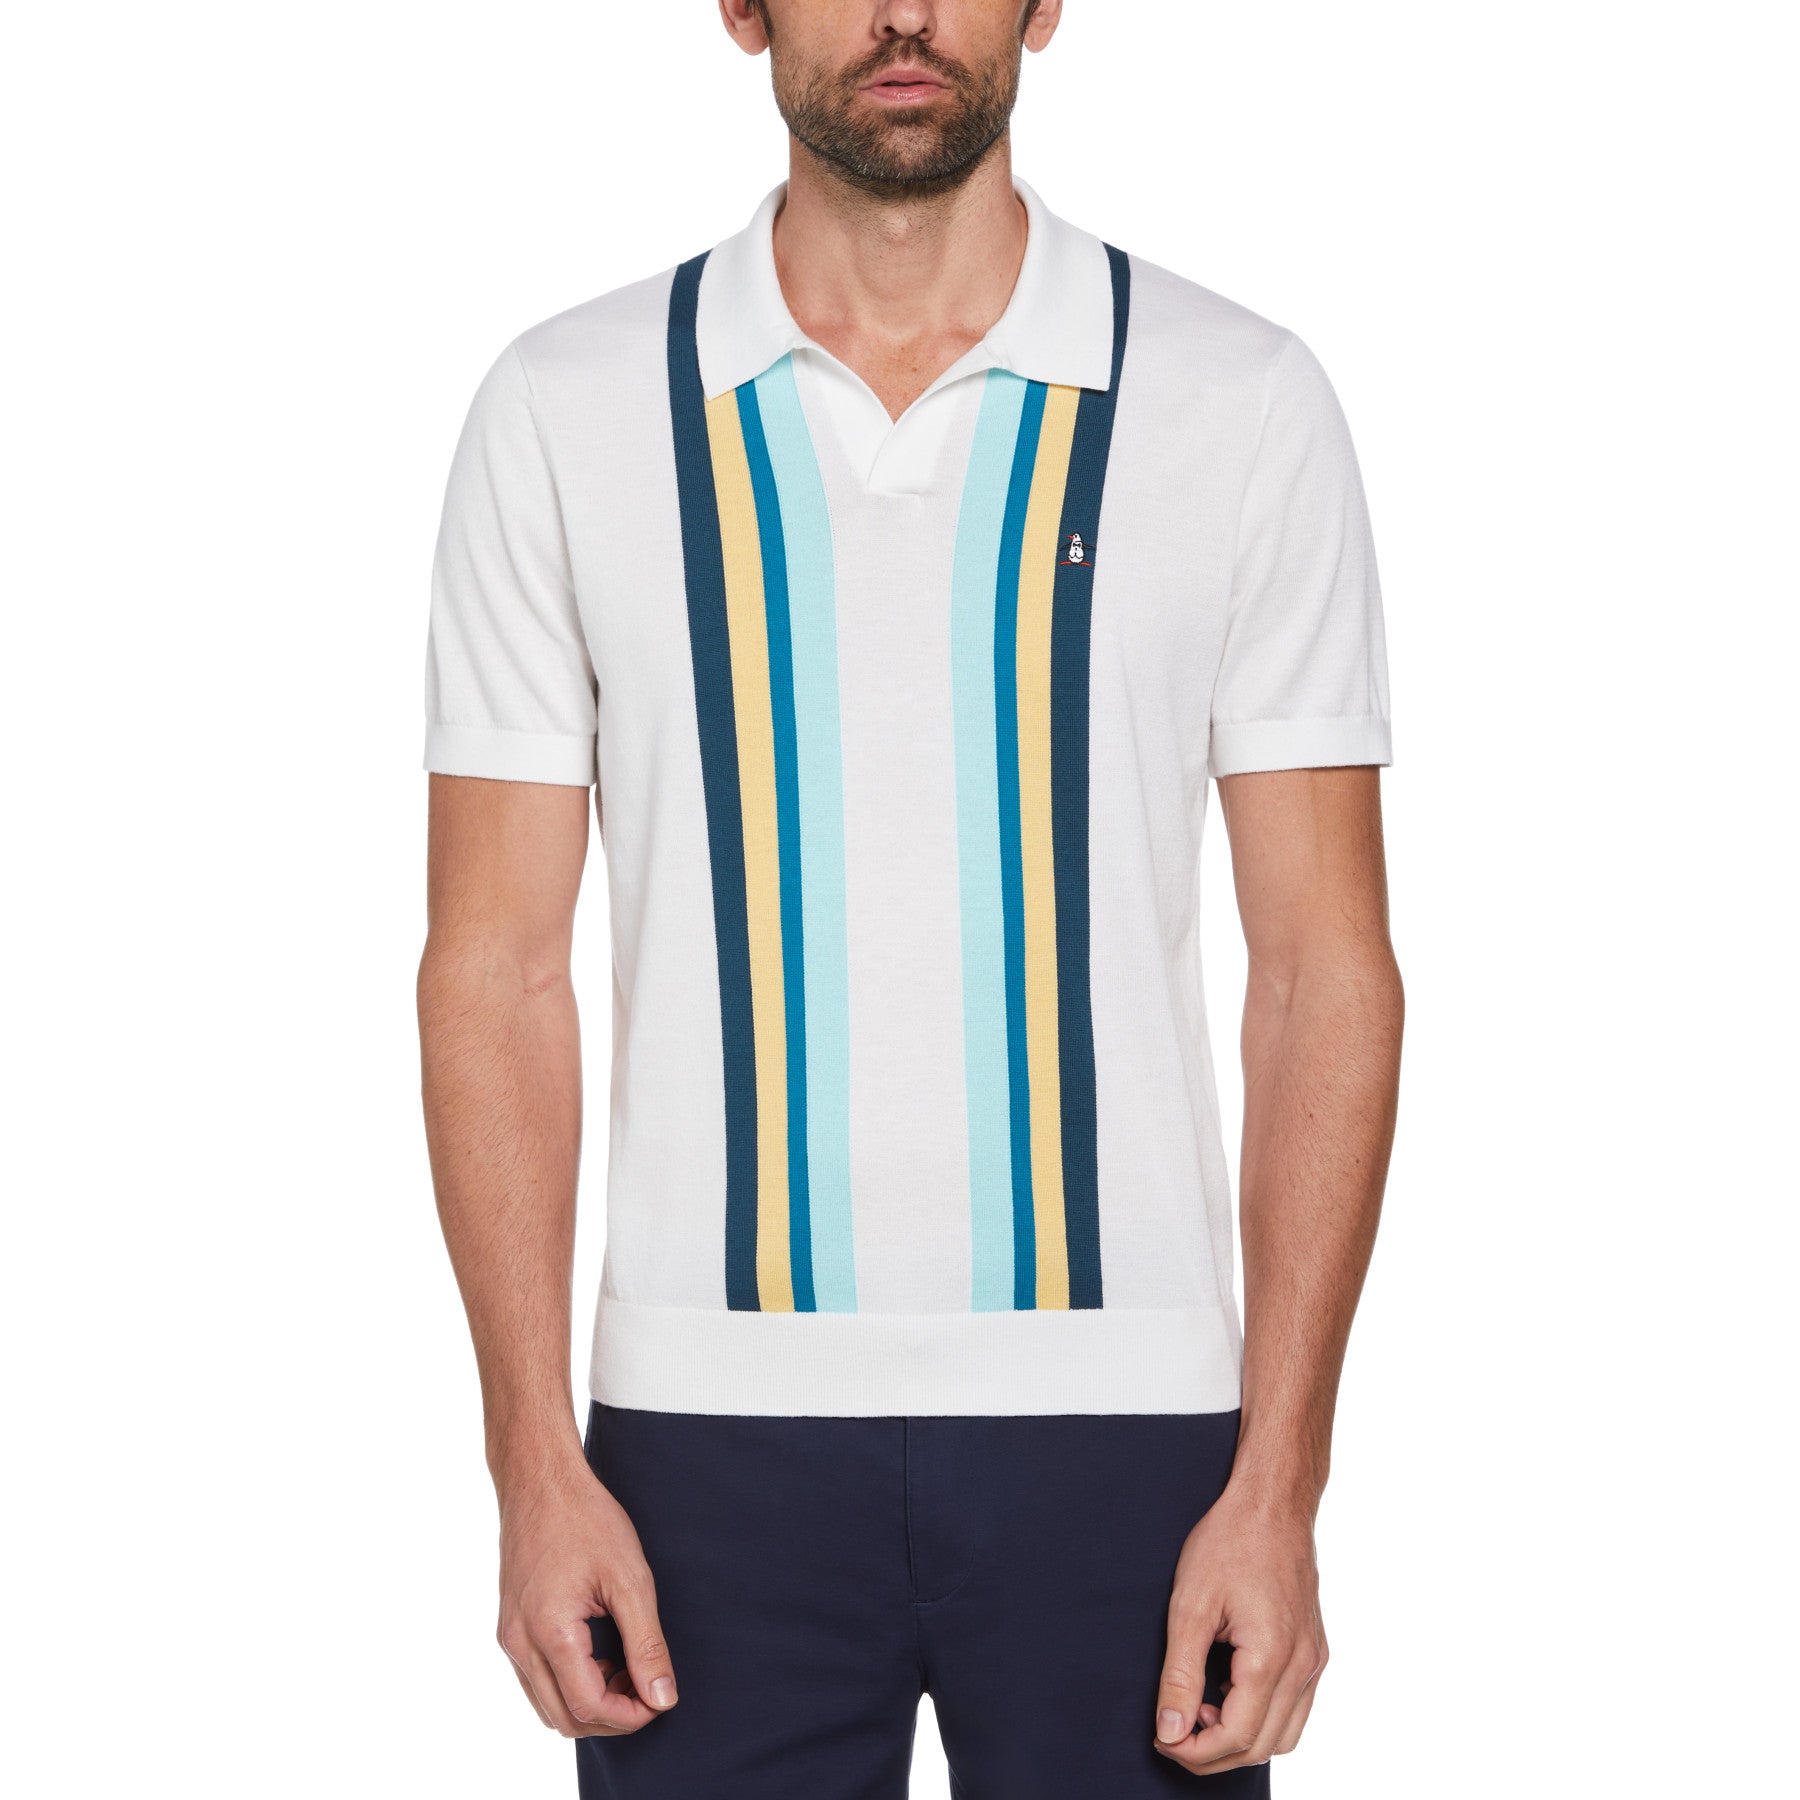 View Original Penguin Icons Short Sleeve Textured Vertical Stripe Polo Jumper In Bright Whit White Mens information